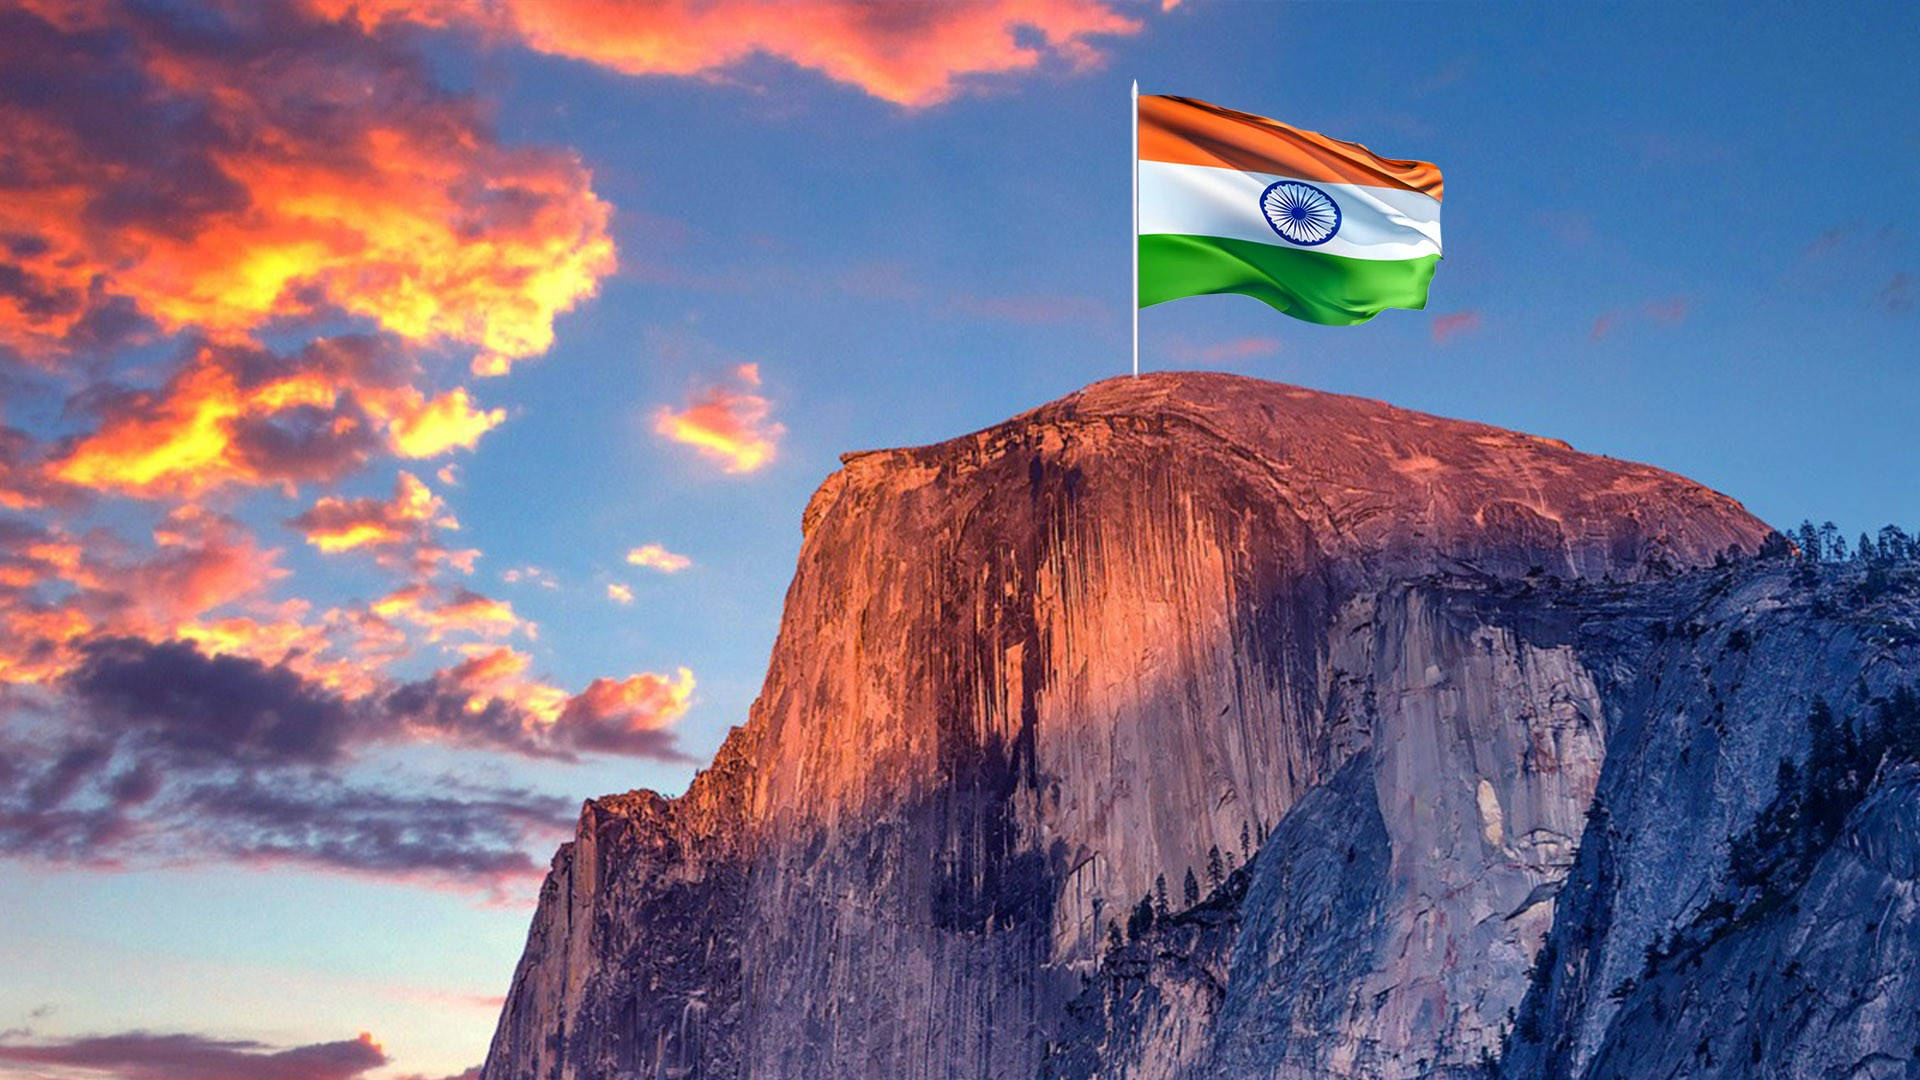 Mountain Top With Indian Flag Background